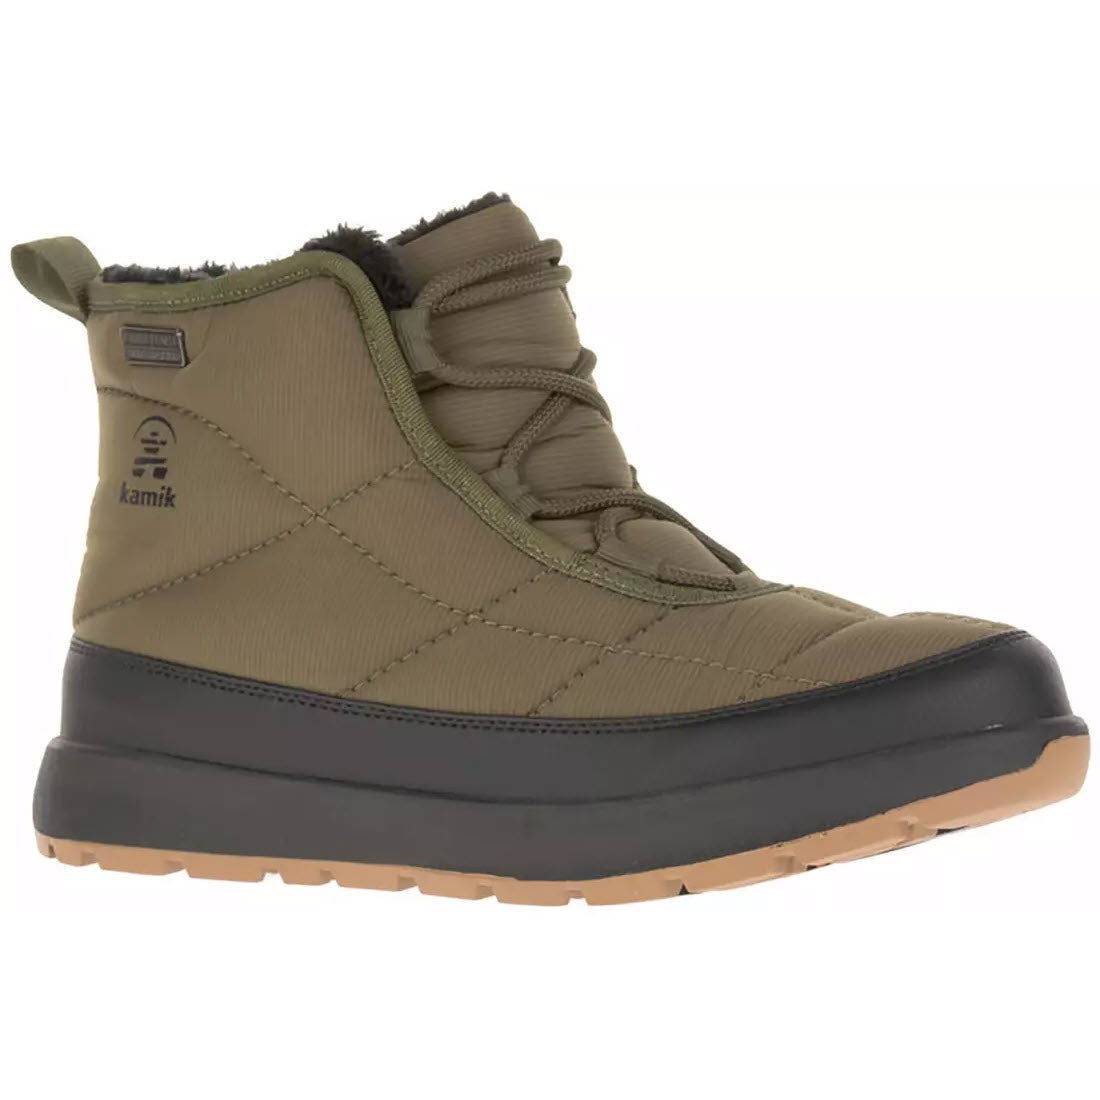 A Kamik Ella Low Dark Olive insulated winter boot with a rubber sole and DriDefense membrane branding on the side.